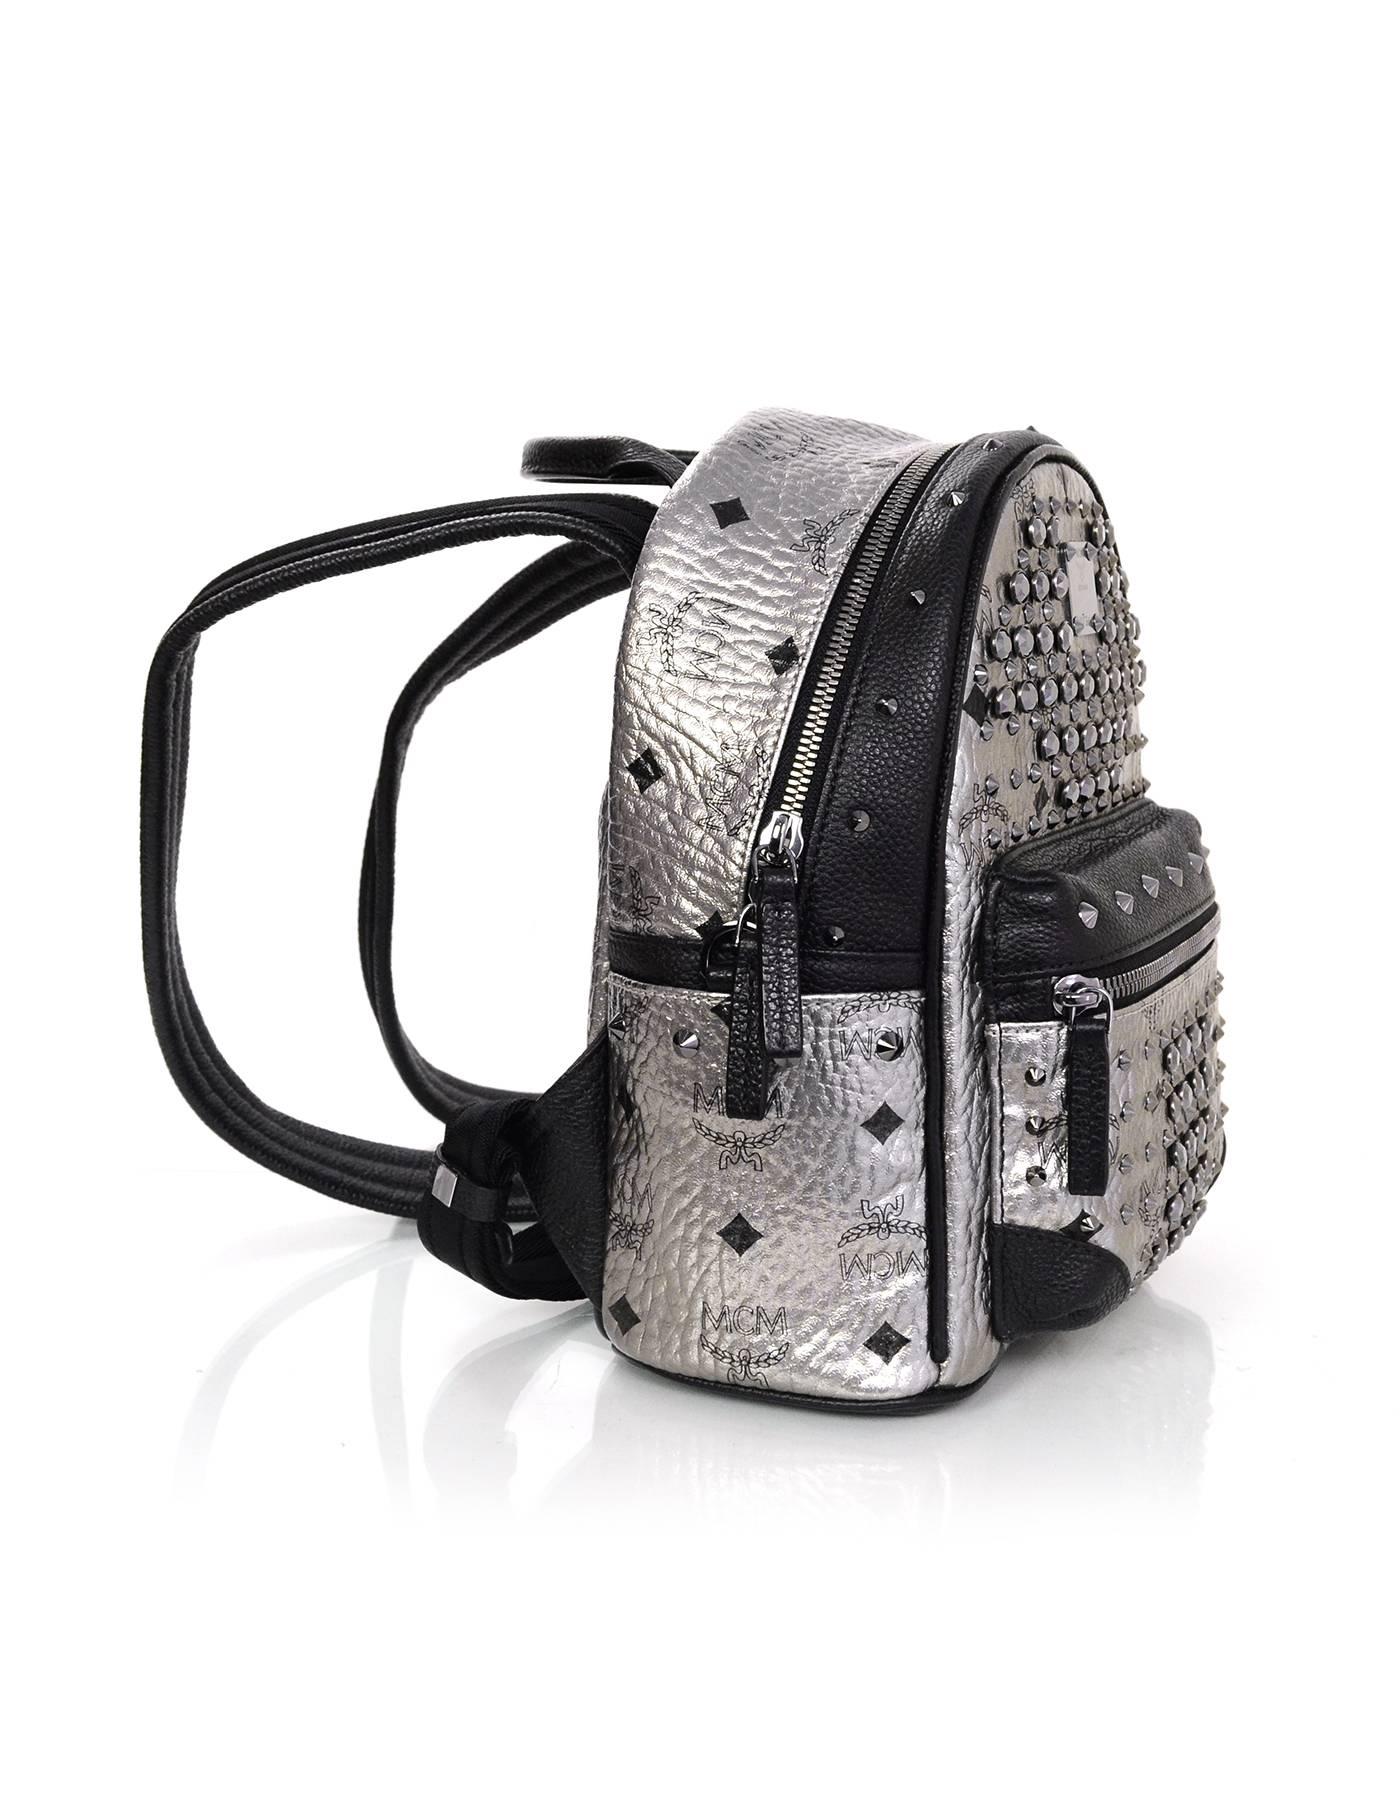 100% Authentic MCM Silver Monogram Crystal Studded Mini Backpack. Features silver canvas with MCM logo and black swarovski crystal studding throughout. Black leather trim and gunmetal hardware.

Made In: Korea
Color: Silver and black
Hardware: